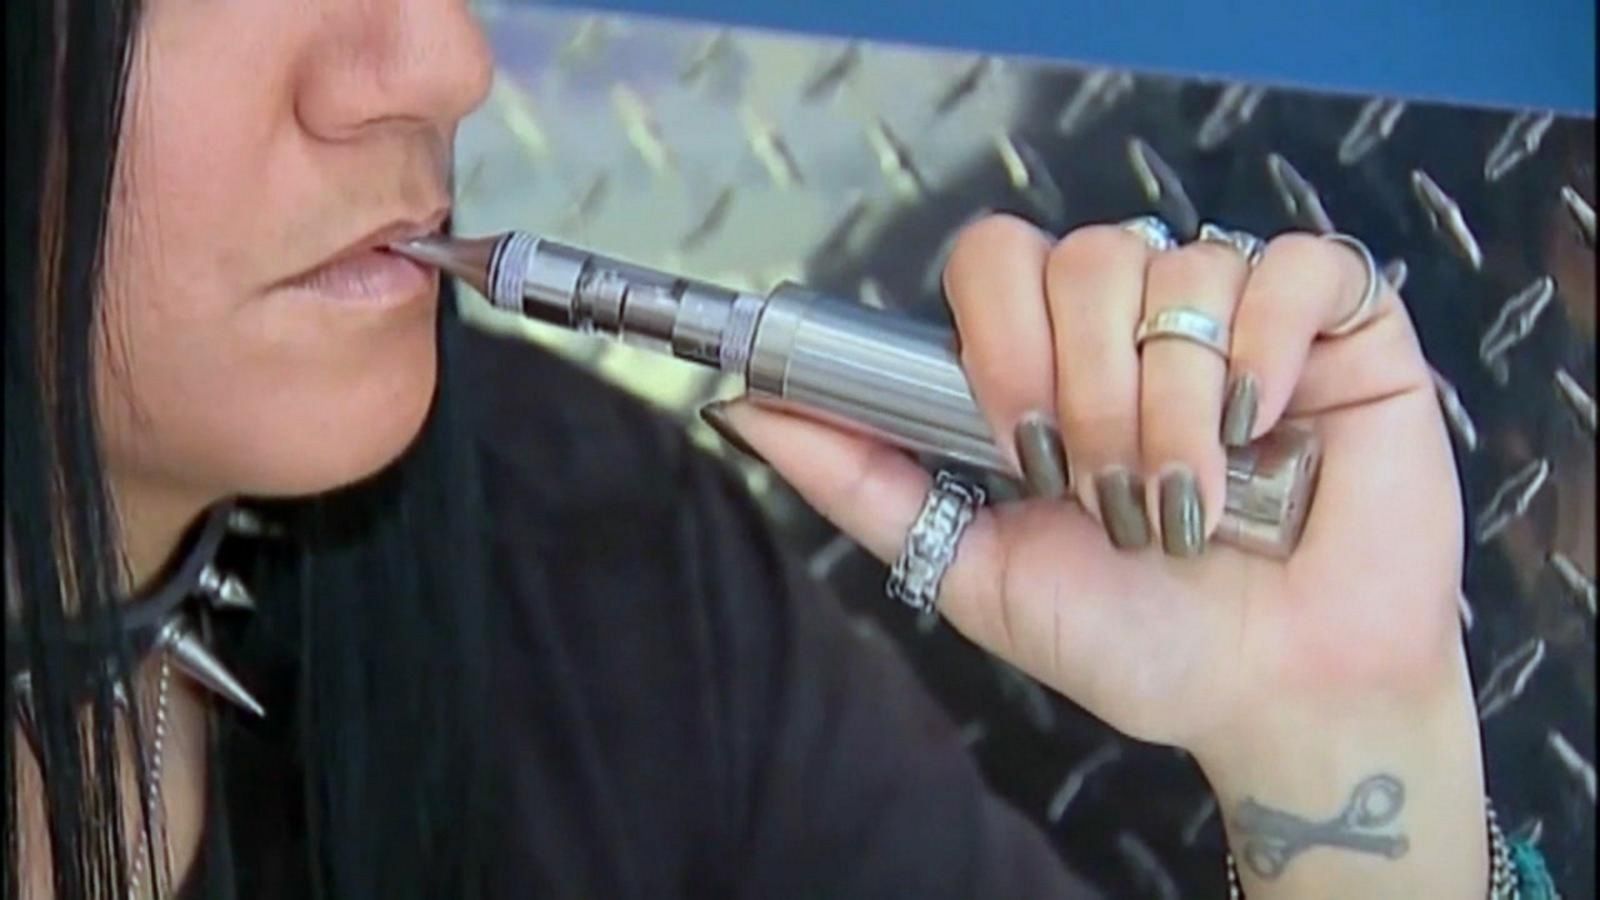 VIDEO: Toxin identified that may have caused vaping-related deaths